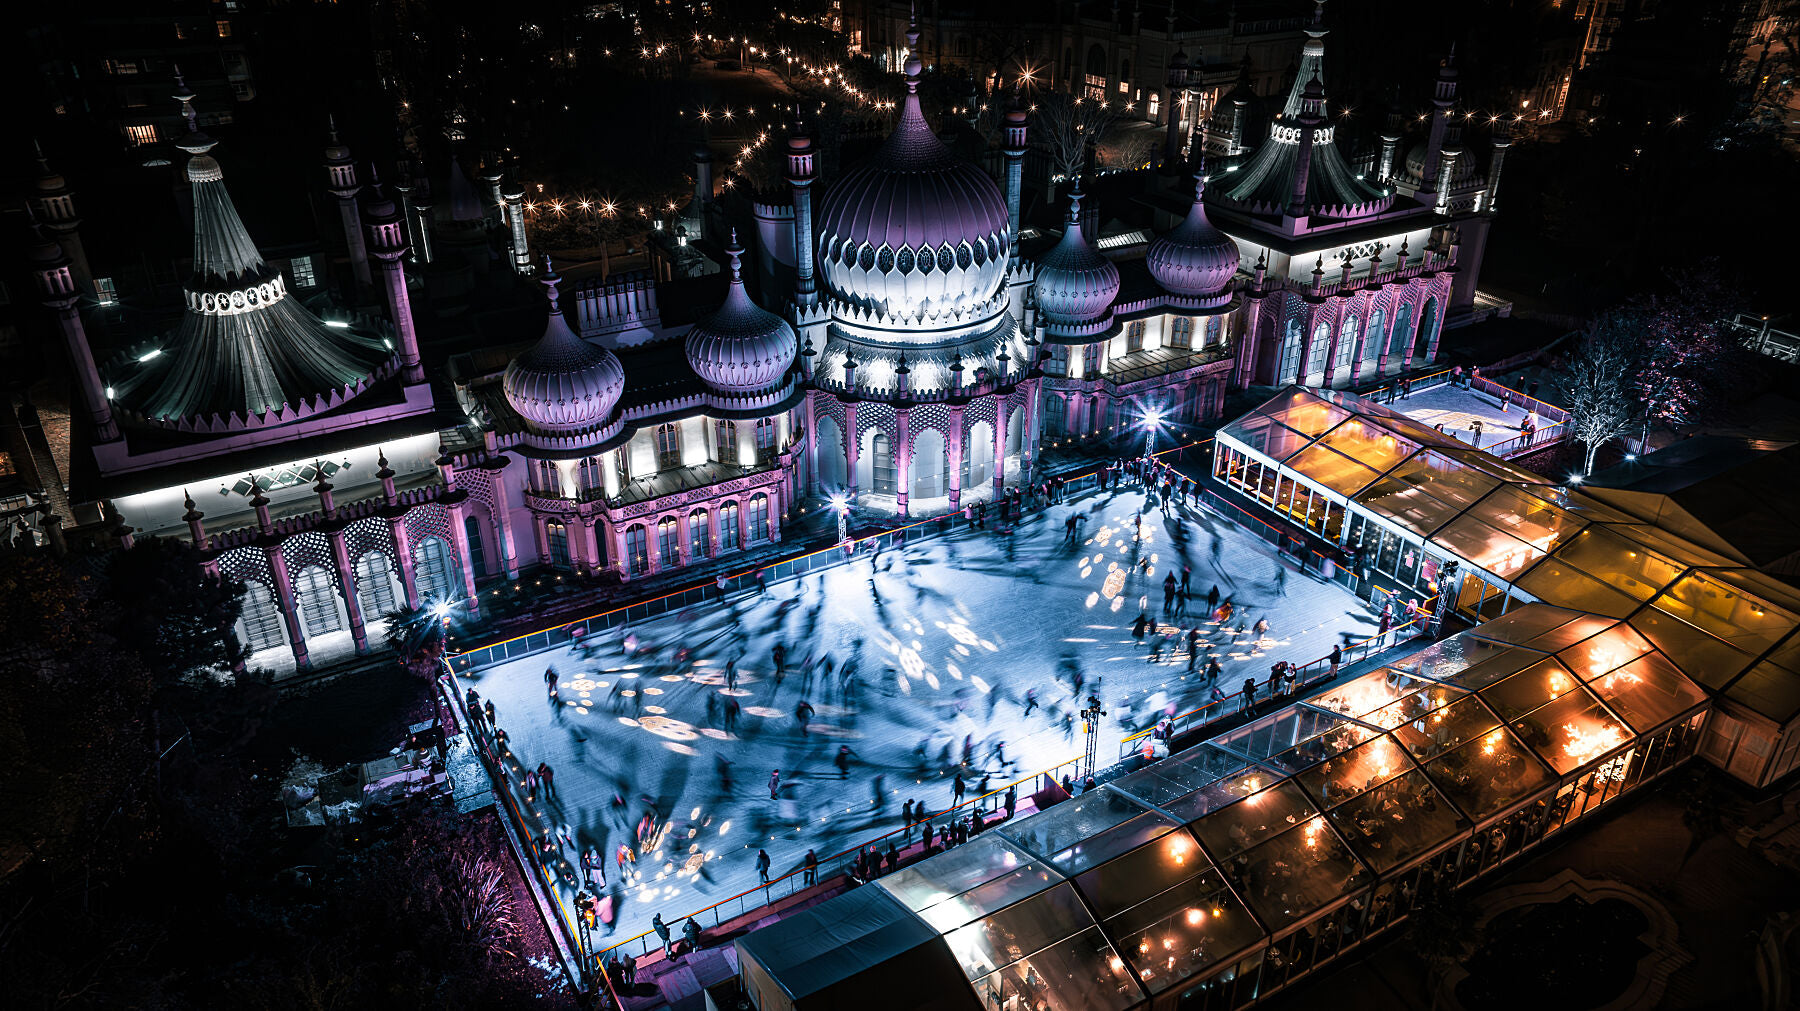 Aerial view of Brighton Royal Pavilion on a cold winter night, ice skaters on center stage. Printed or framed photography art.